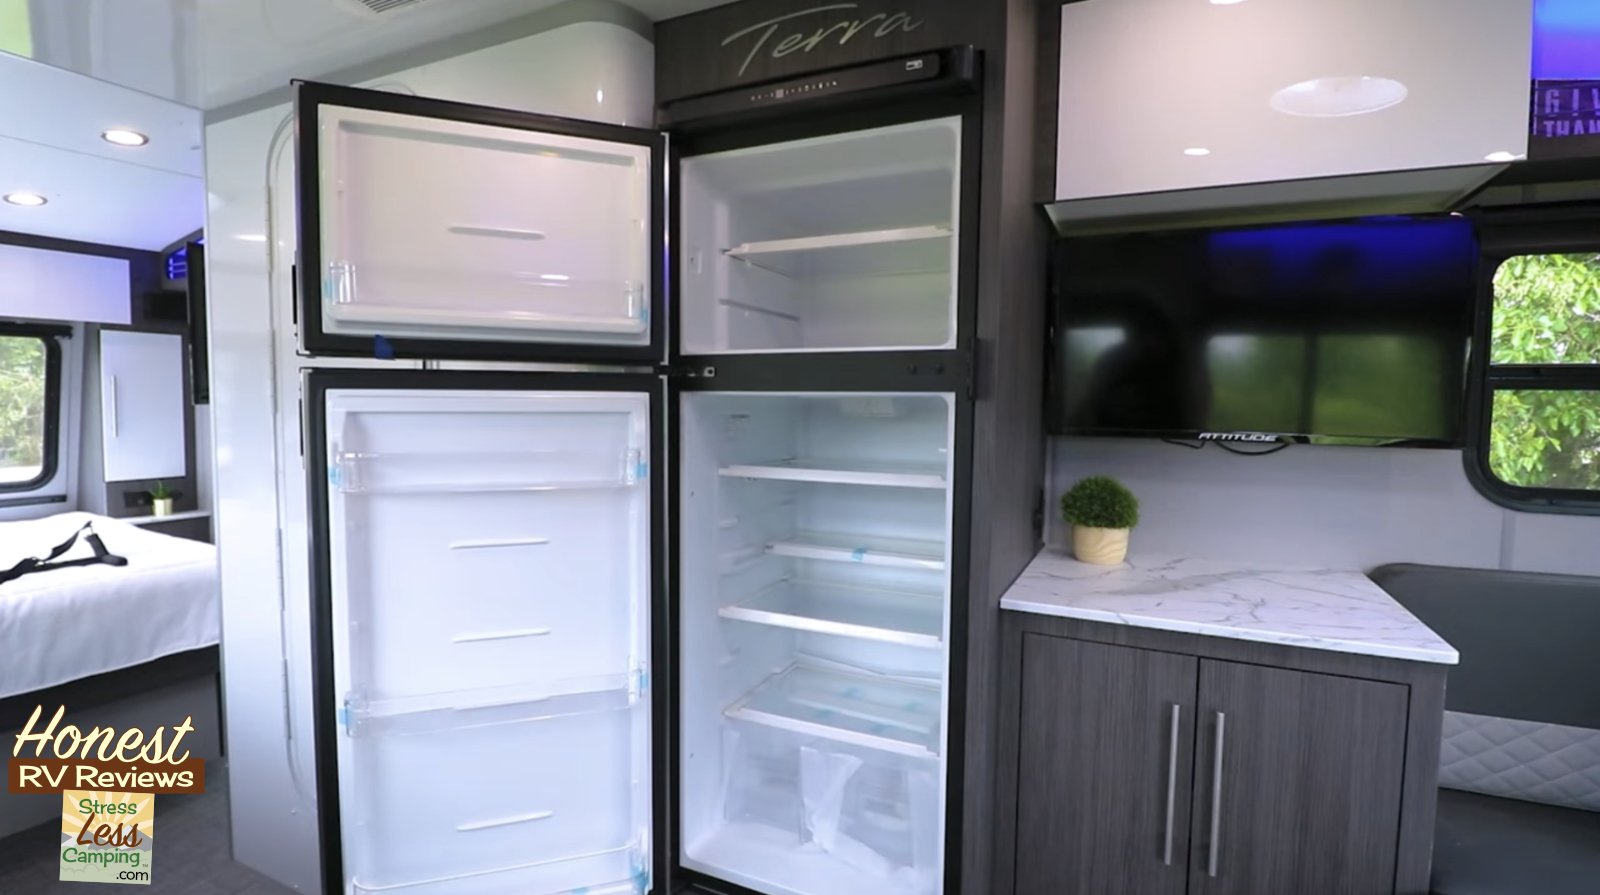 A 10 cubic foot 12 volt fridge features a night mode for more ef (Copy)